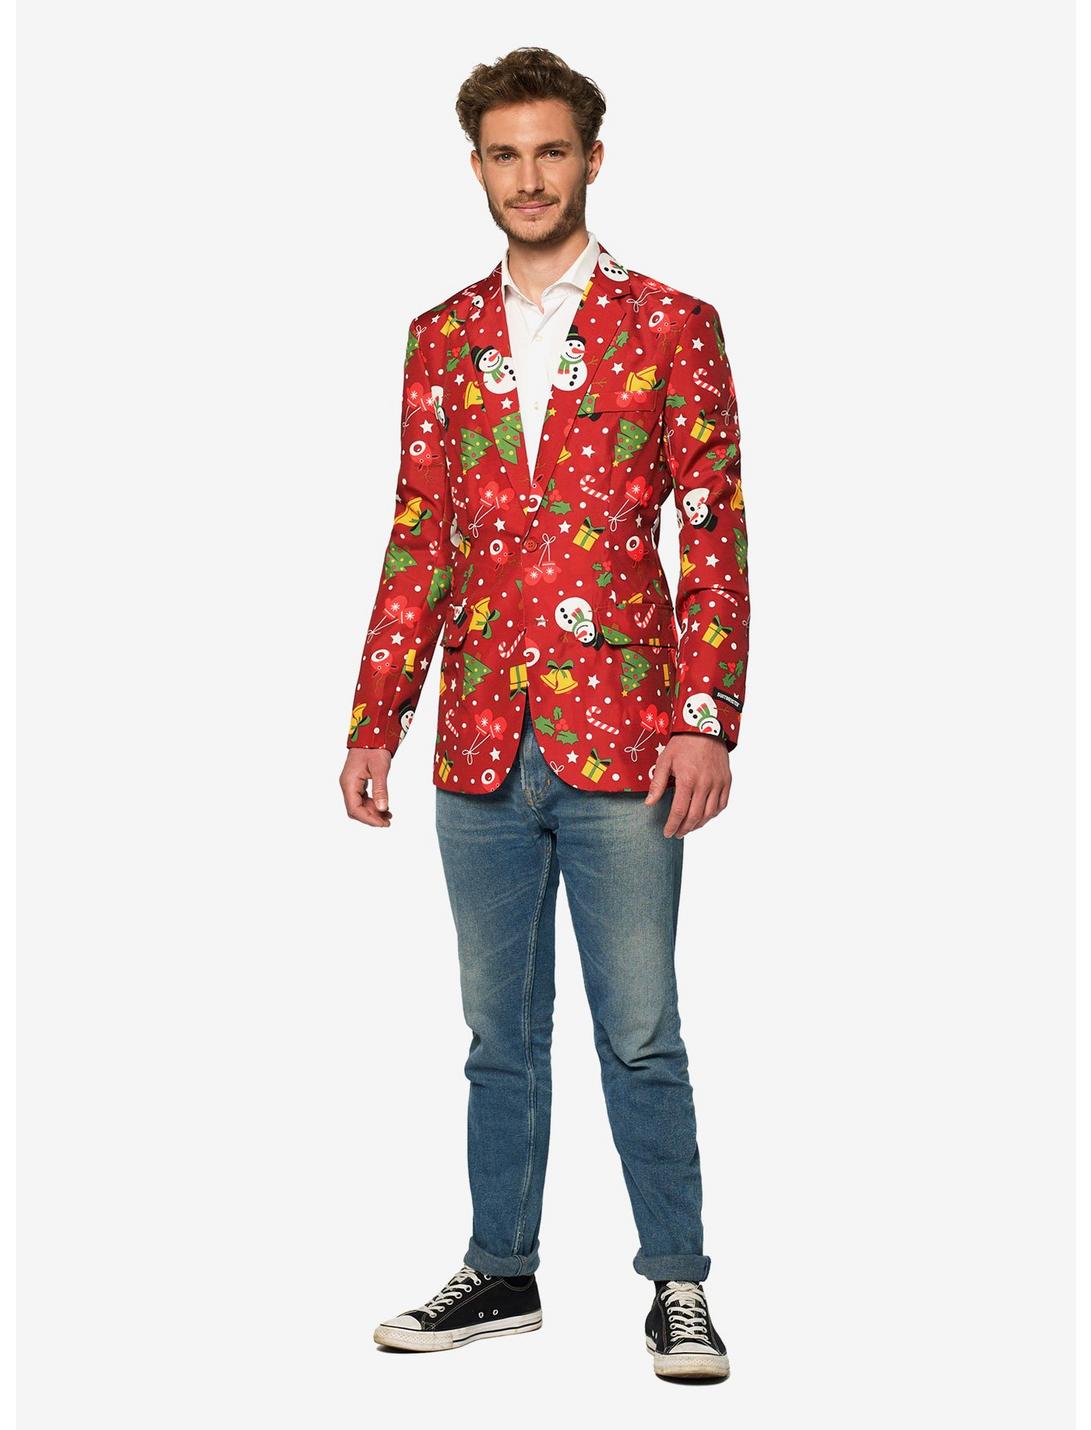 Suitmeister Men's Christmas Red Icons Christmas Light Up Blazer, RED, hi-res